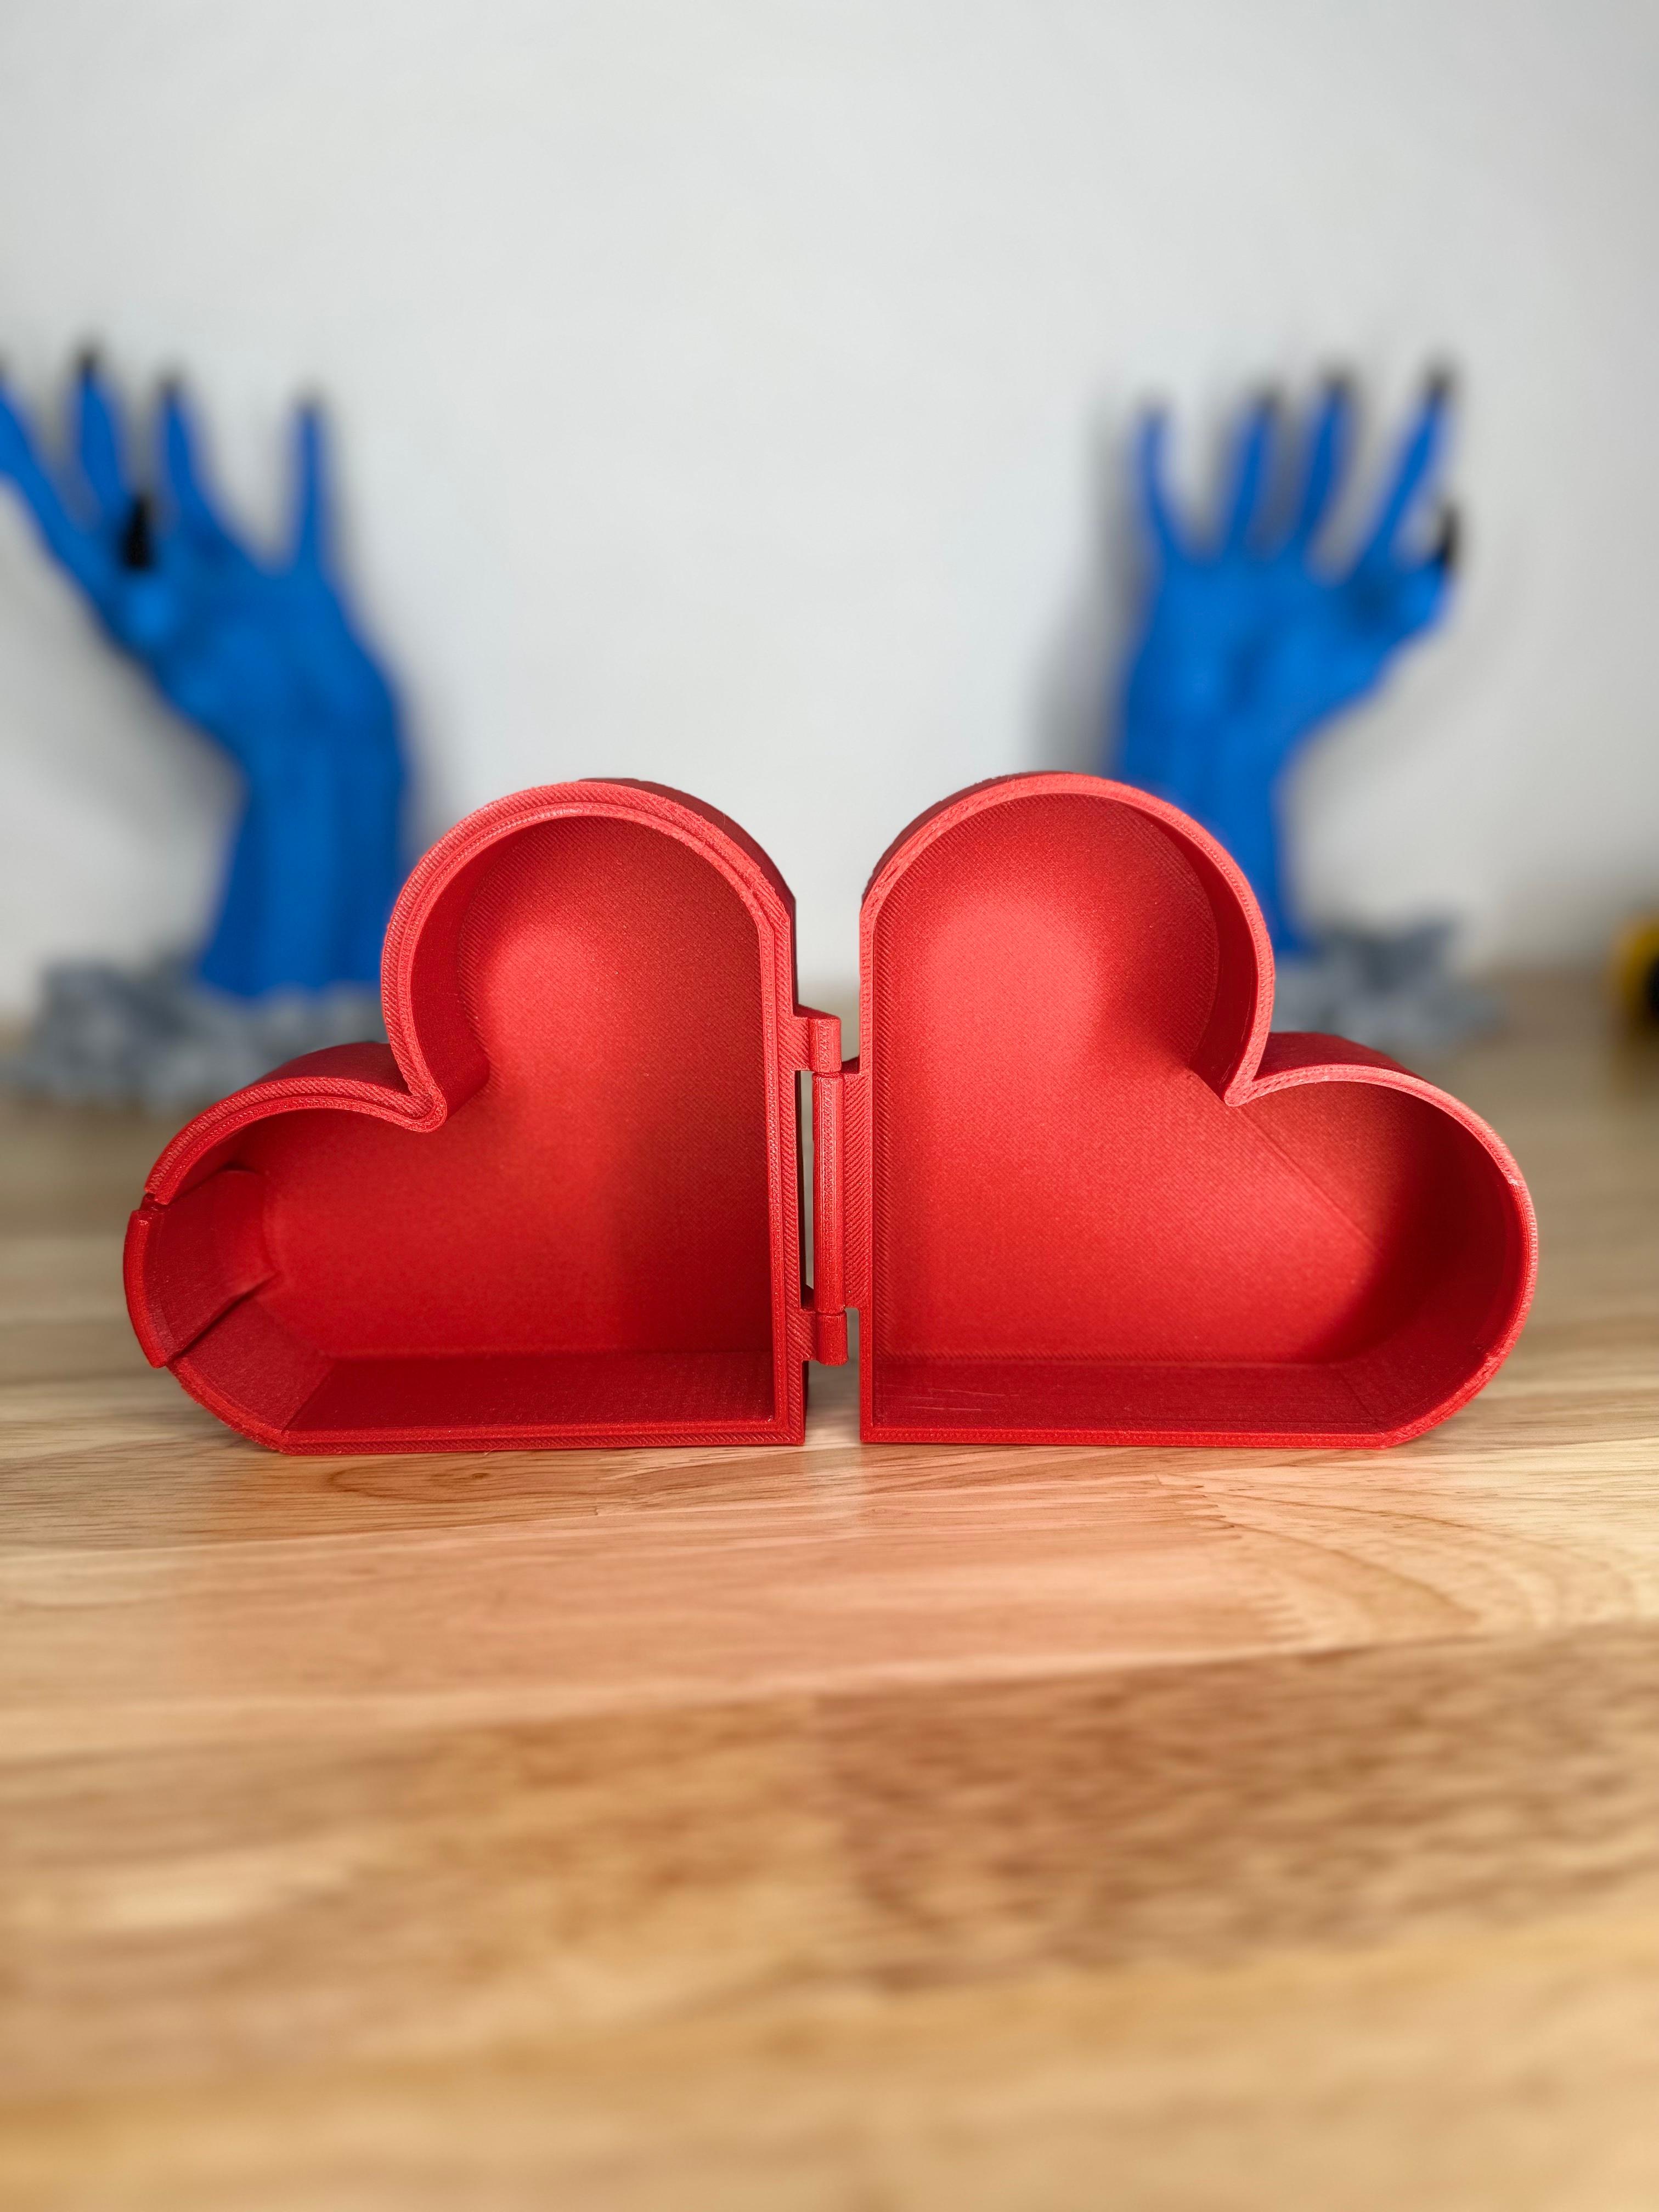 NEW Print in Place Valentine's Day Heart Box 3d model